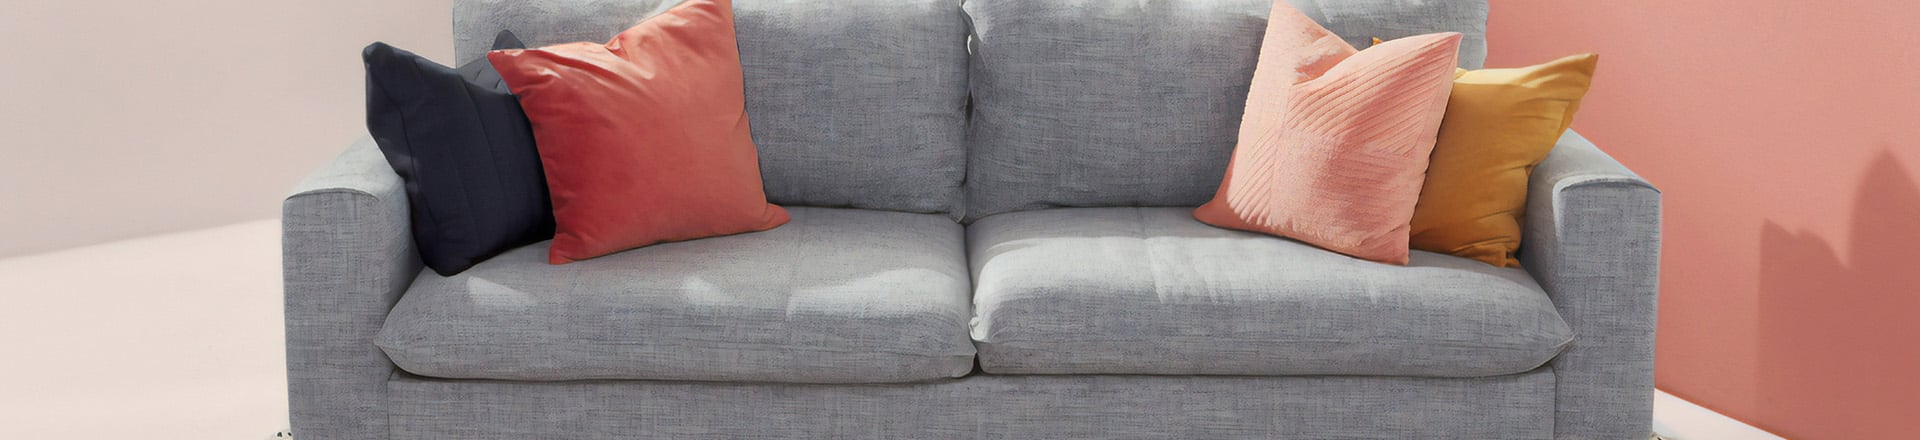 11How to Clean Upholstery?